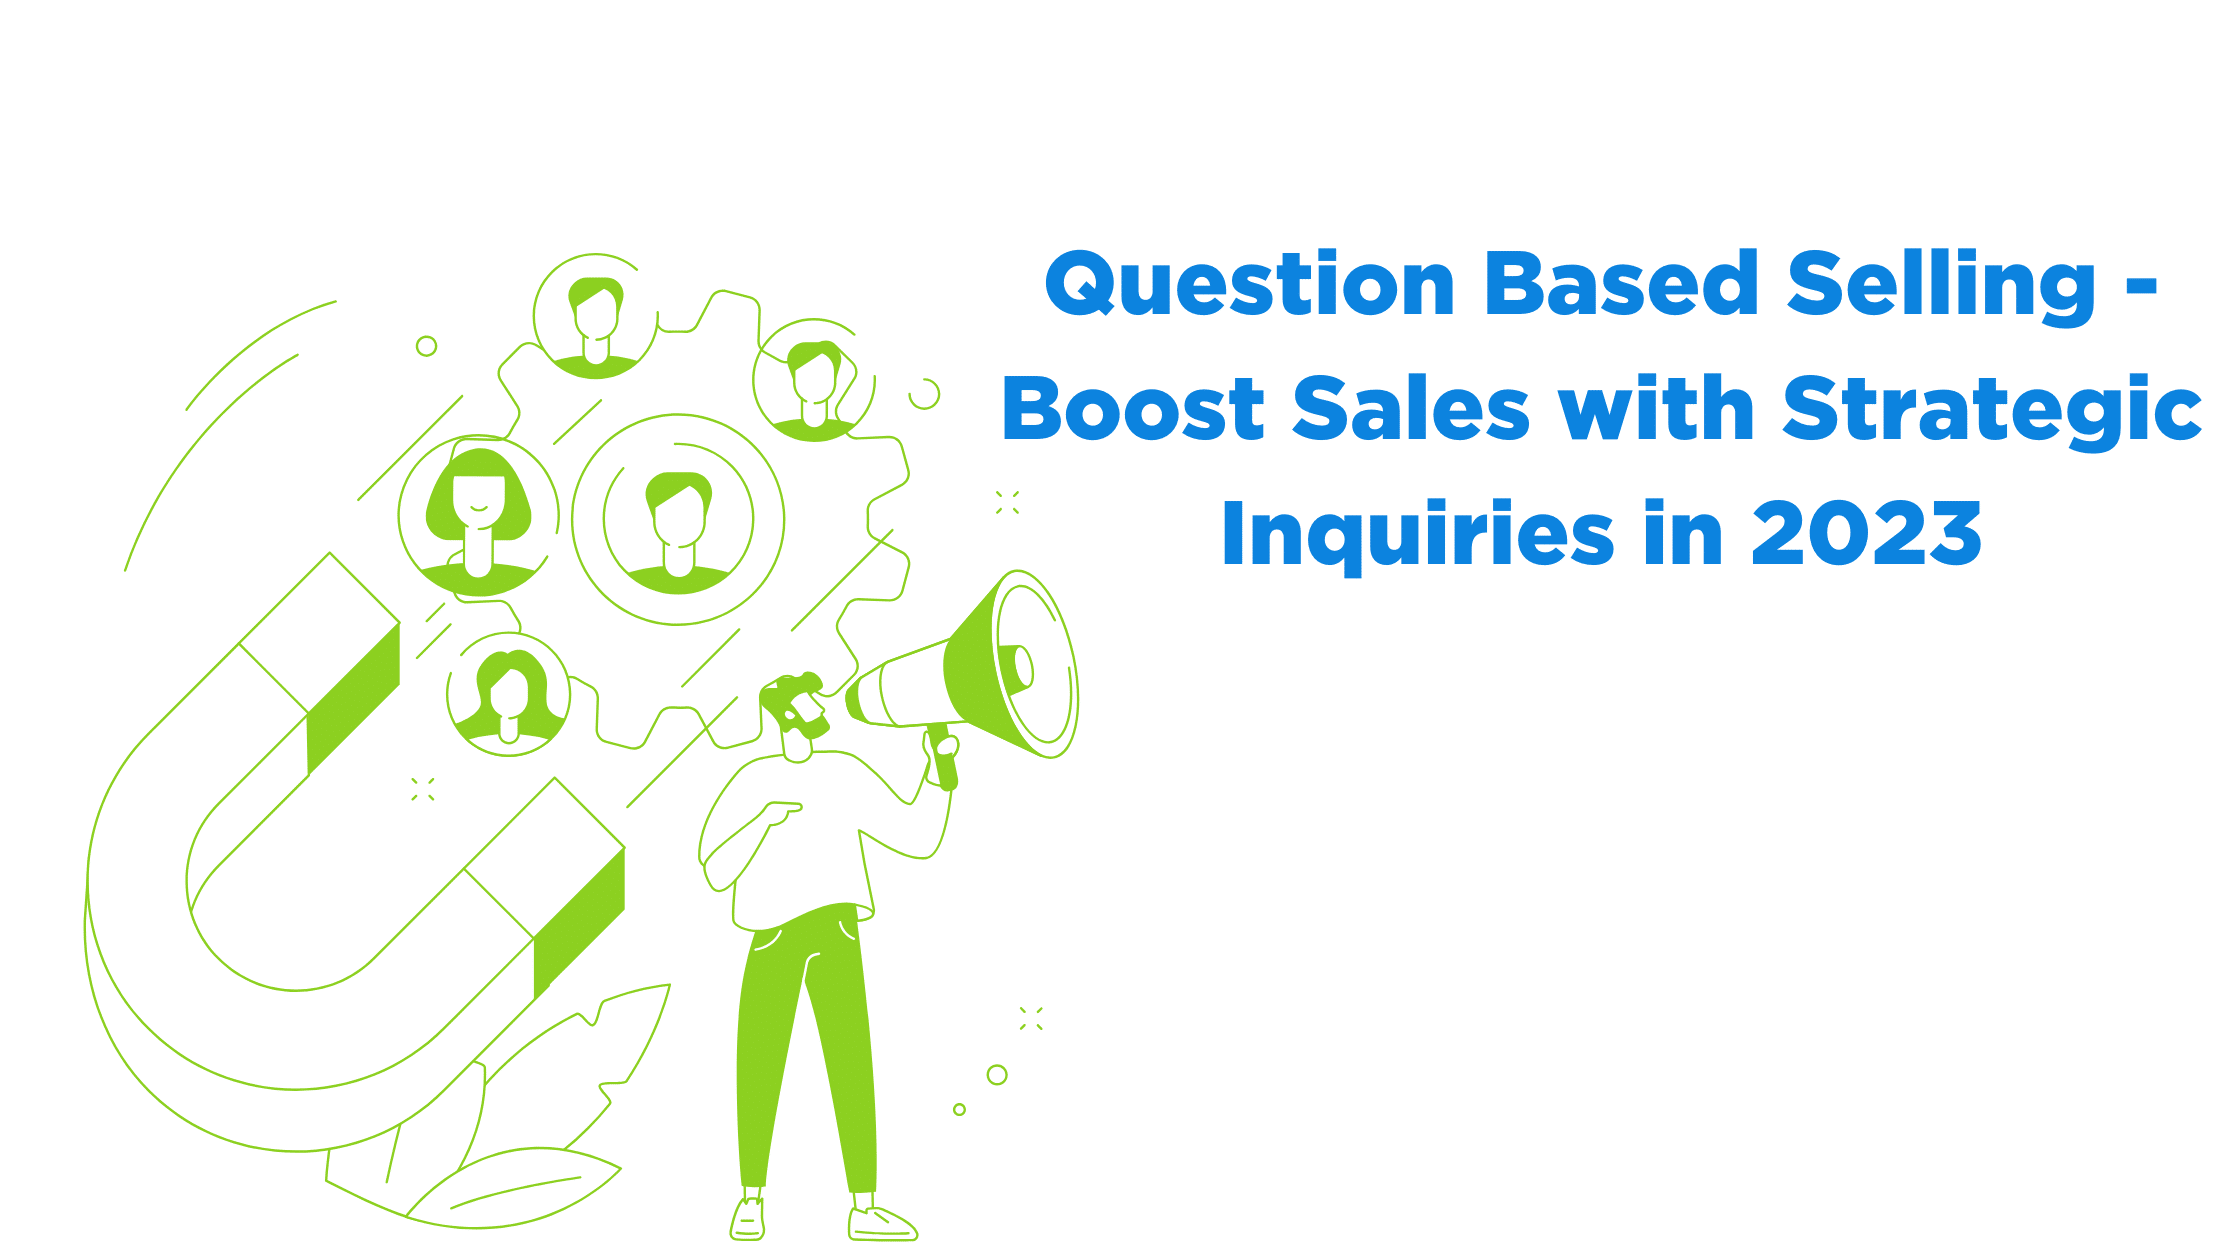 Question Based Selling - Boost Sales with Strategic Inquiries in 2023